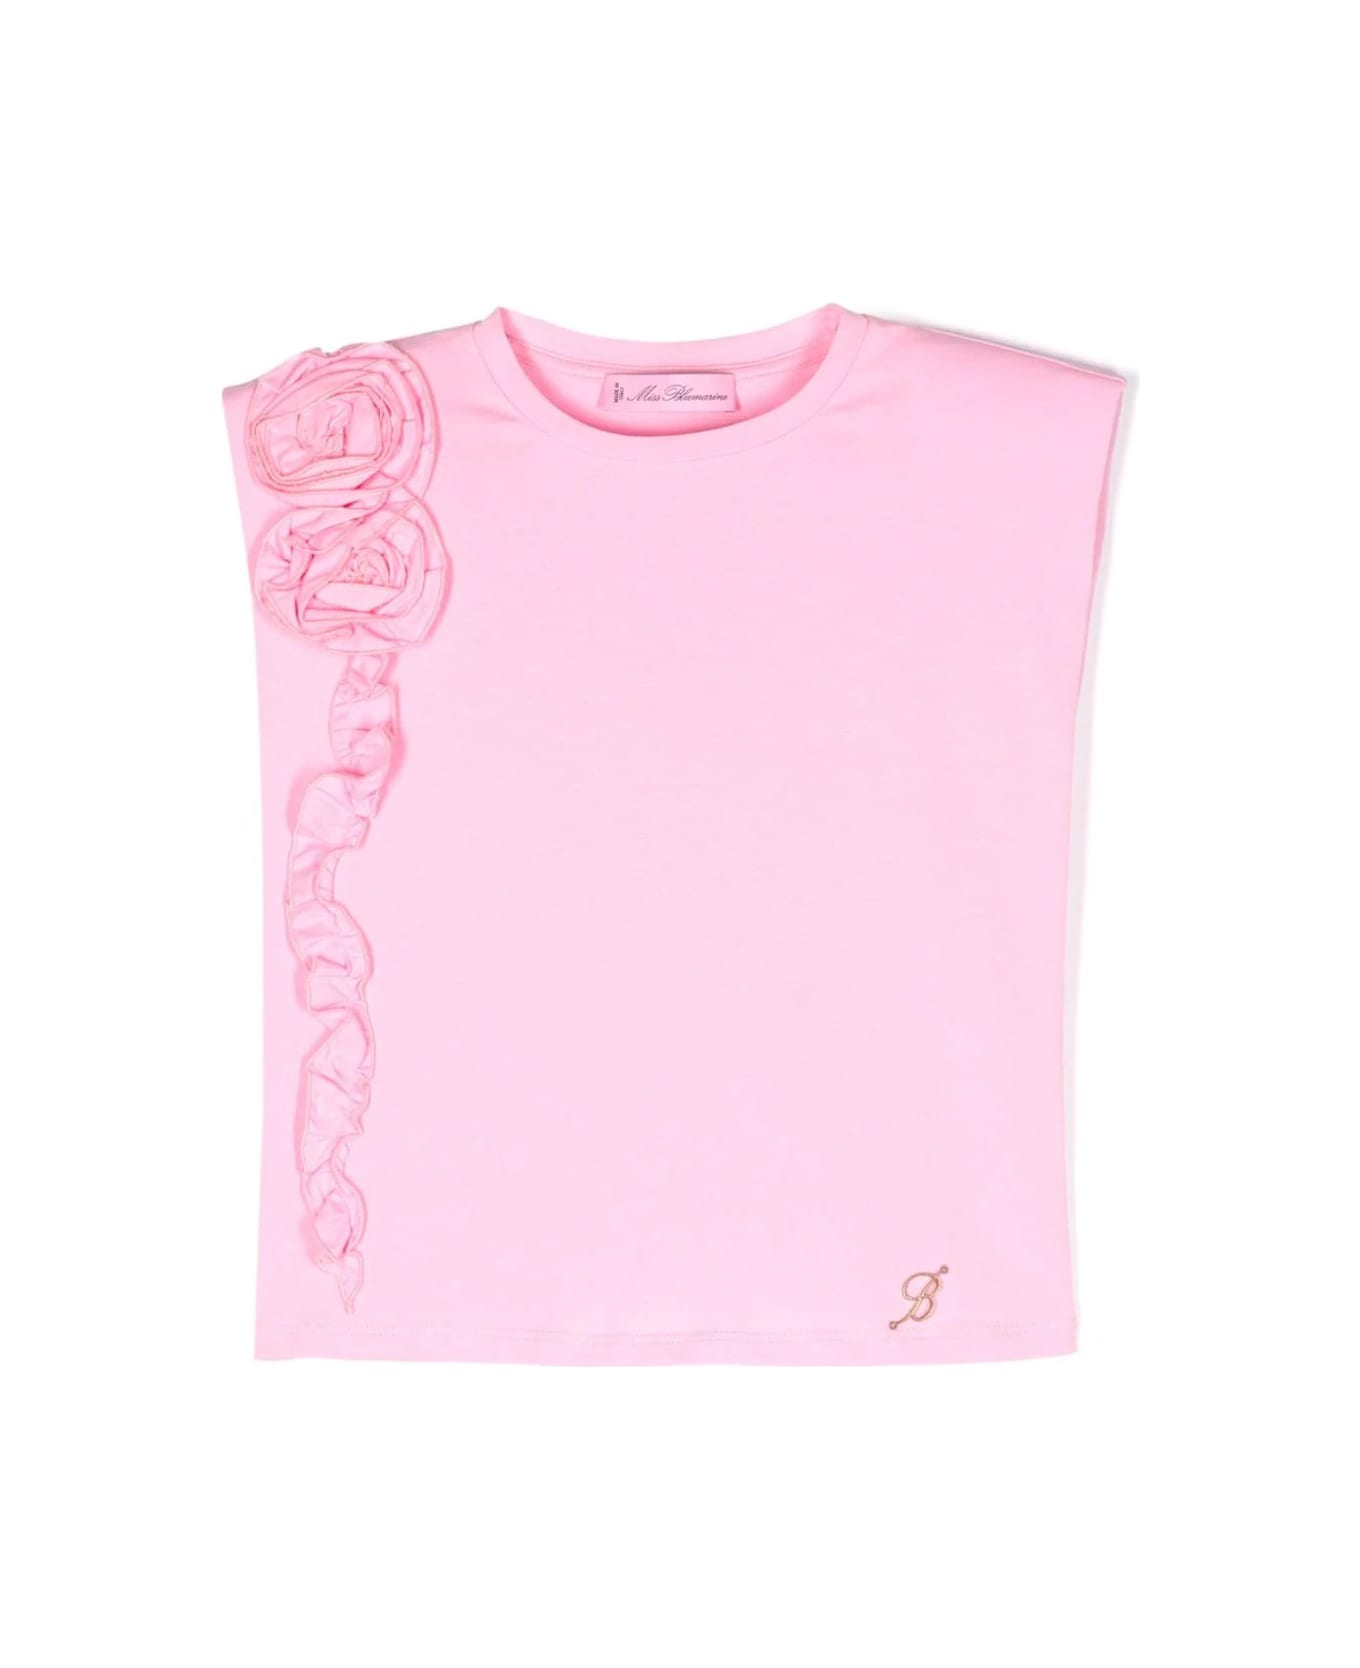 Miss Blumarine Pink T-shirt With Flowers And Ruffles - Rosa